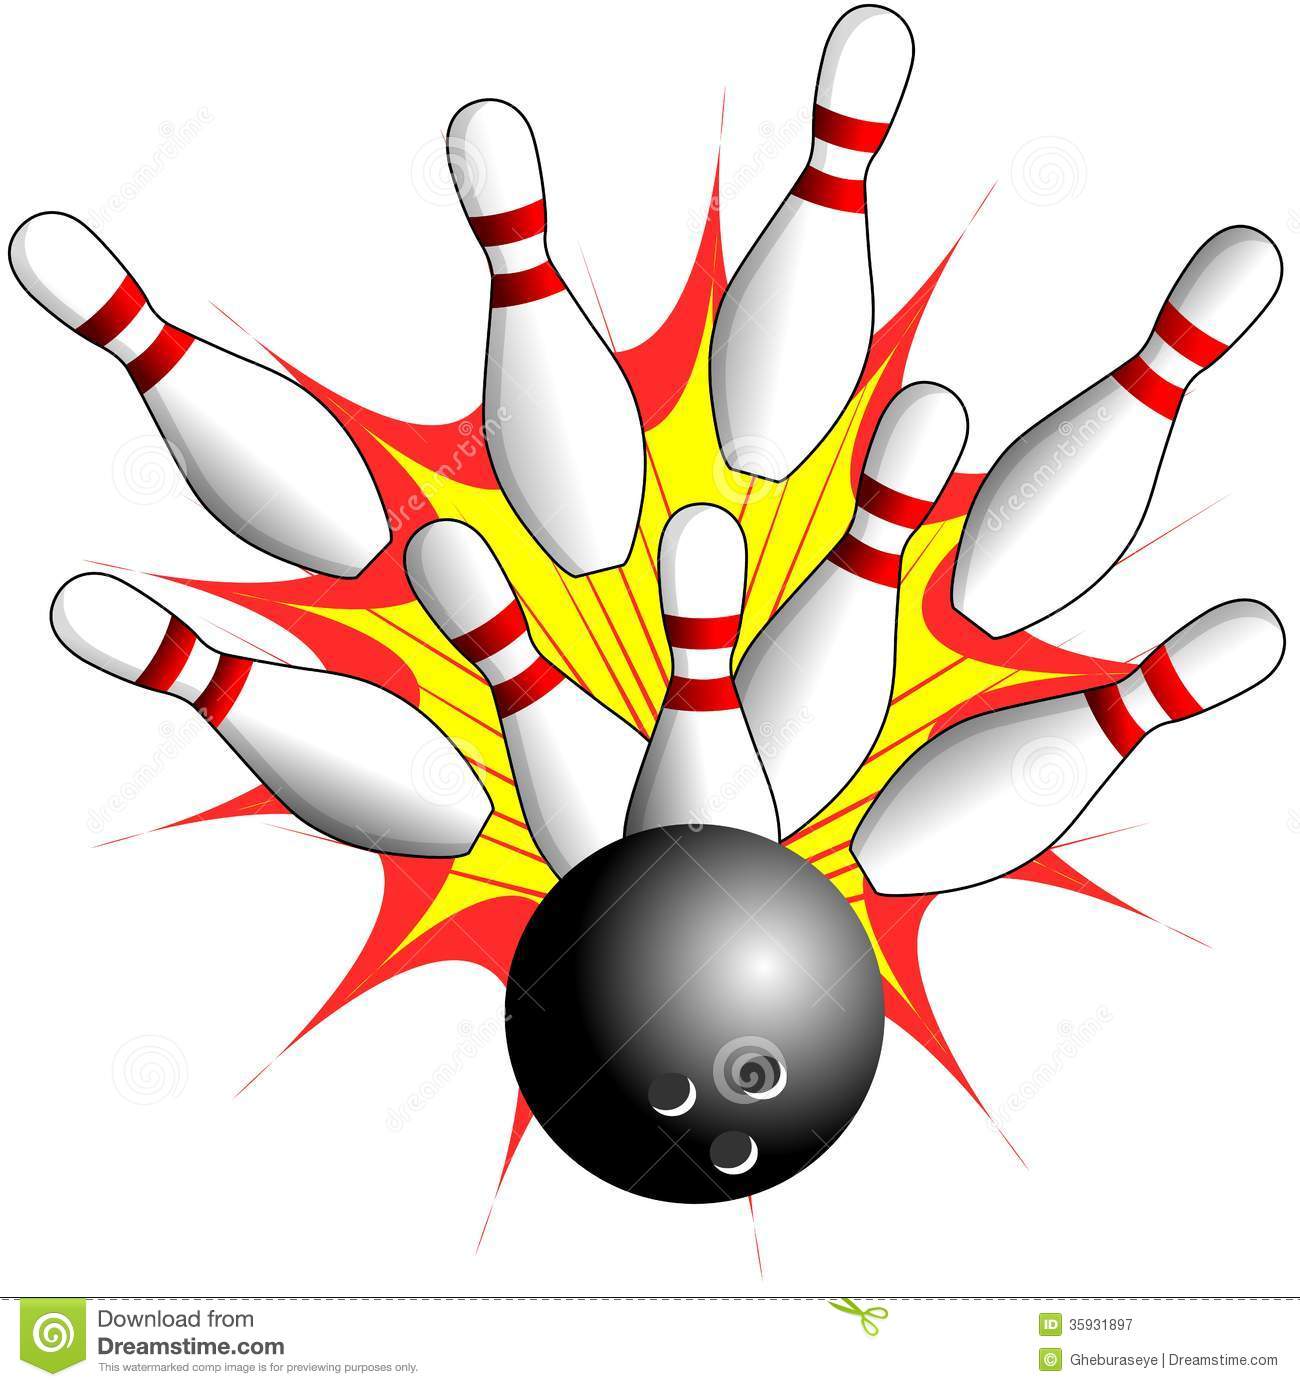 Bowling clipart black and